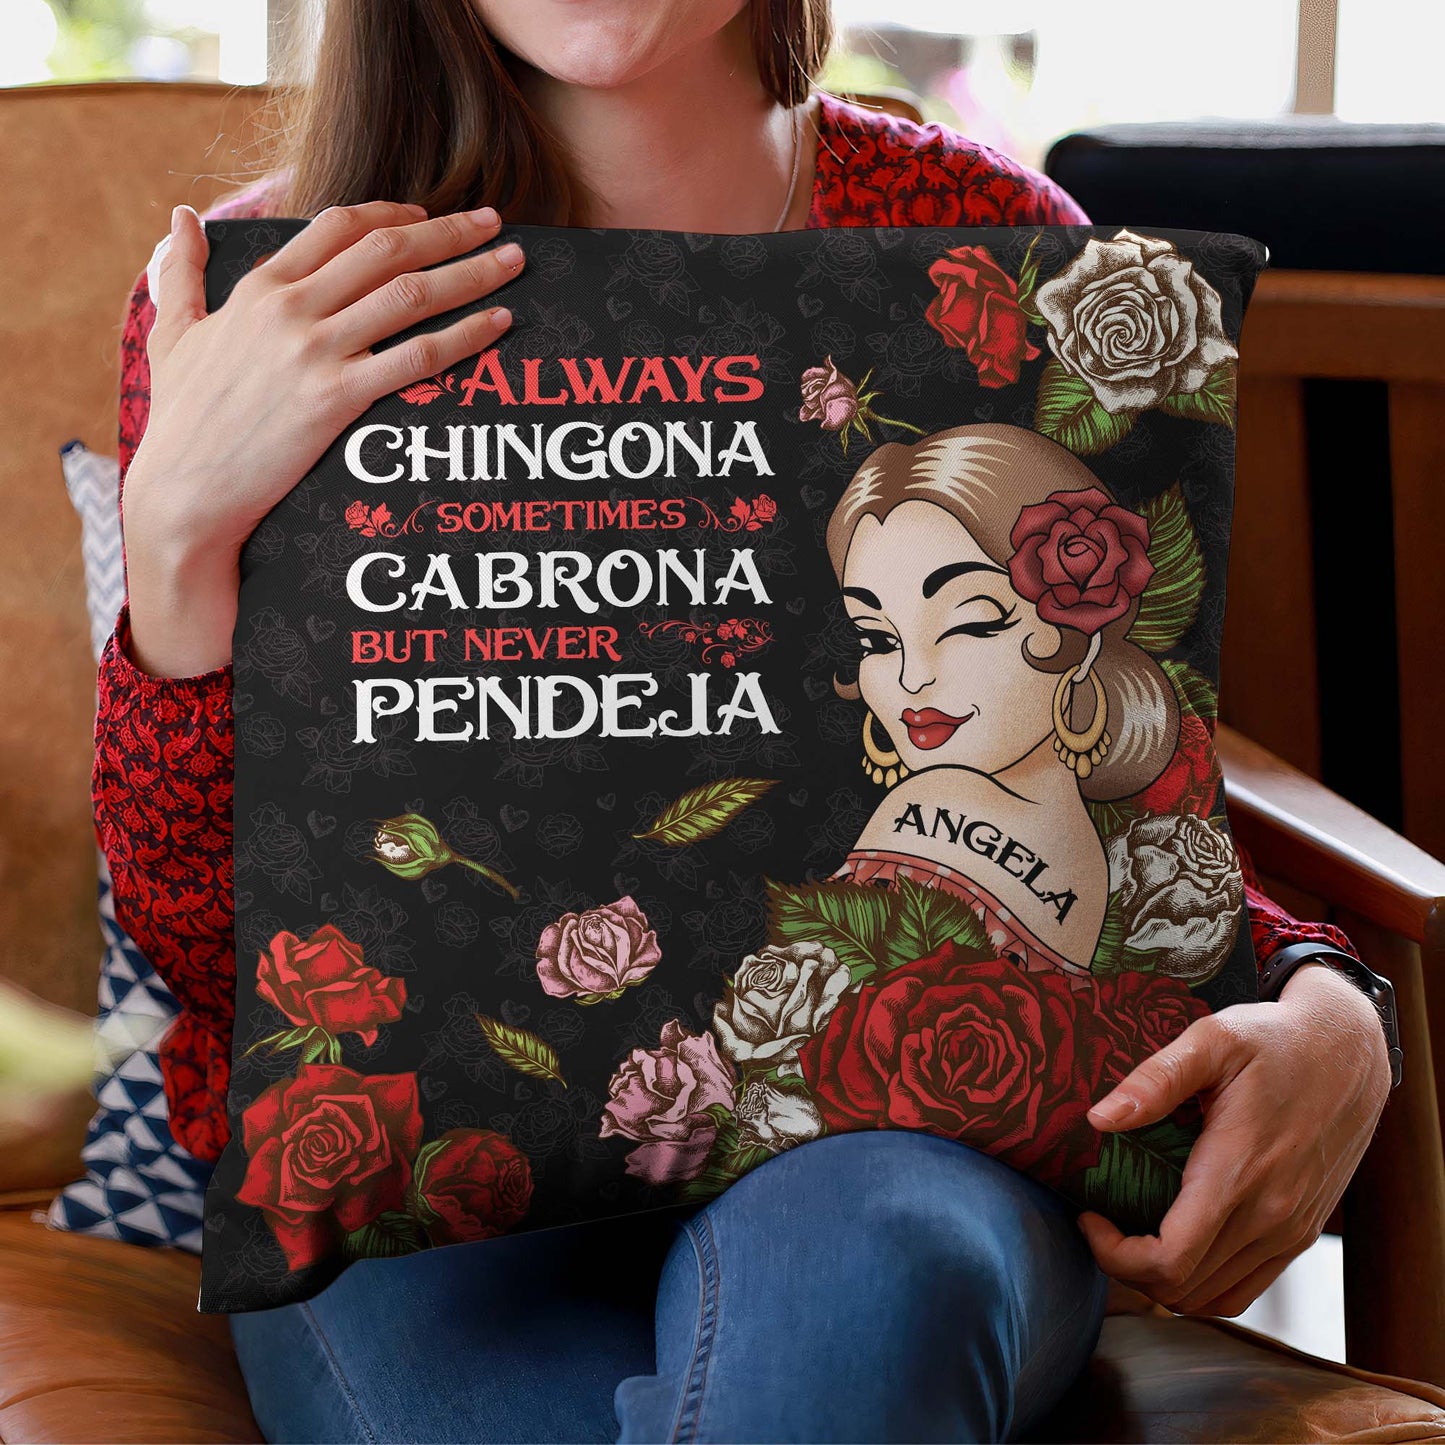 Always Chingona Sometimes Cabrona But Never Pendeja - Personalized Pillow (Insert Included)